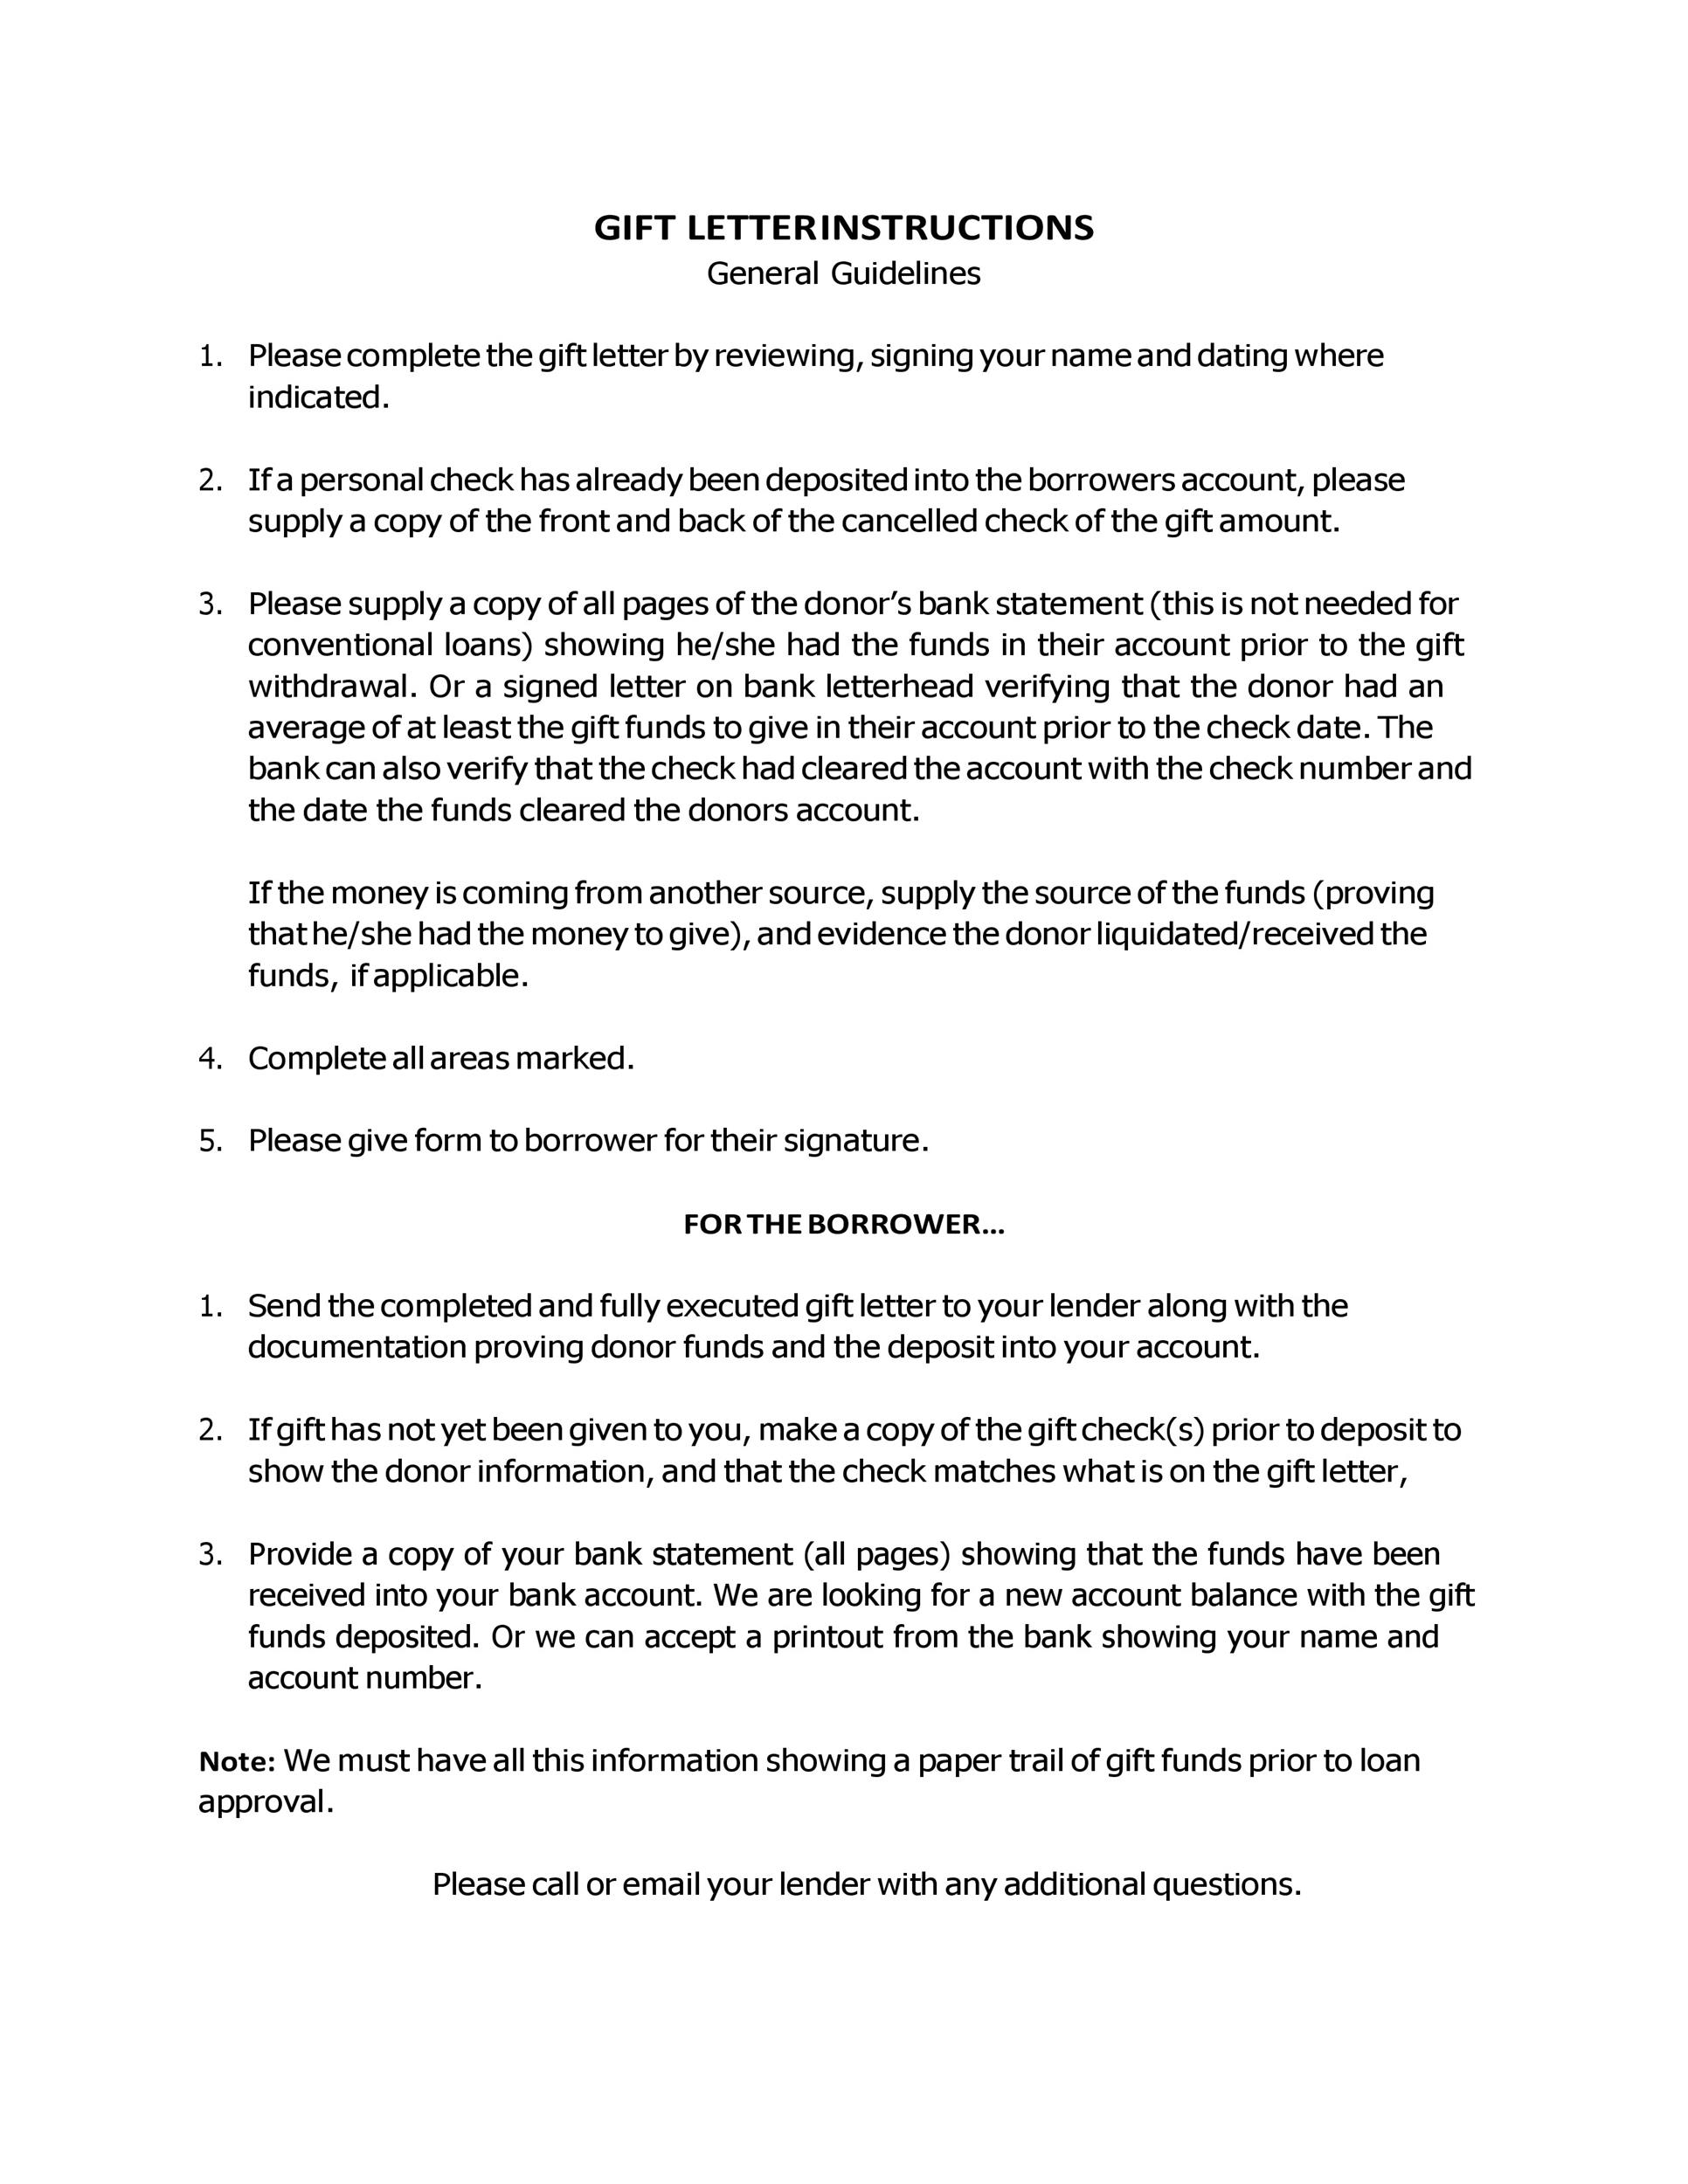 10 Best Gift Letter Templates (Word & PDF) ᐅ TemplateLab Regarding Gifted Deposit Letter Template For Solicitor Inside Gifted Deposit Letter Template For Solicitor